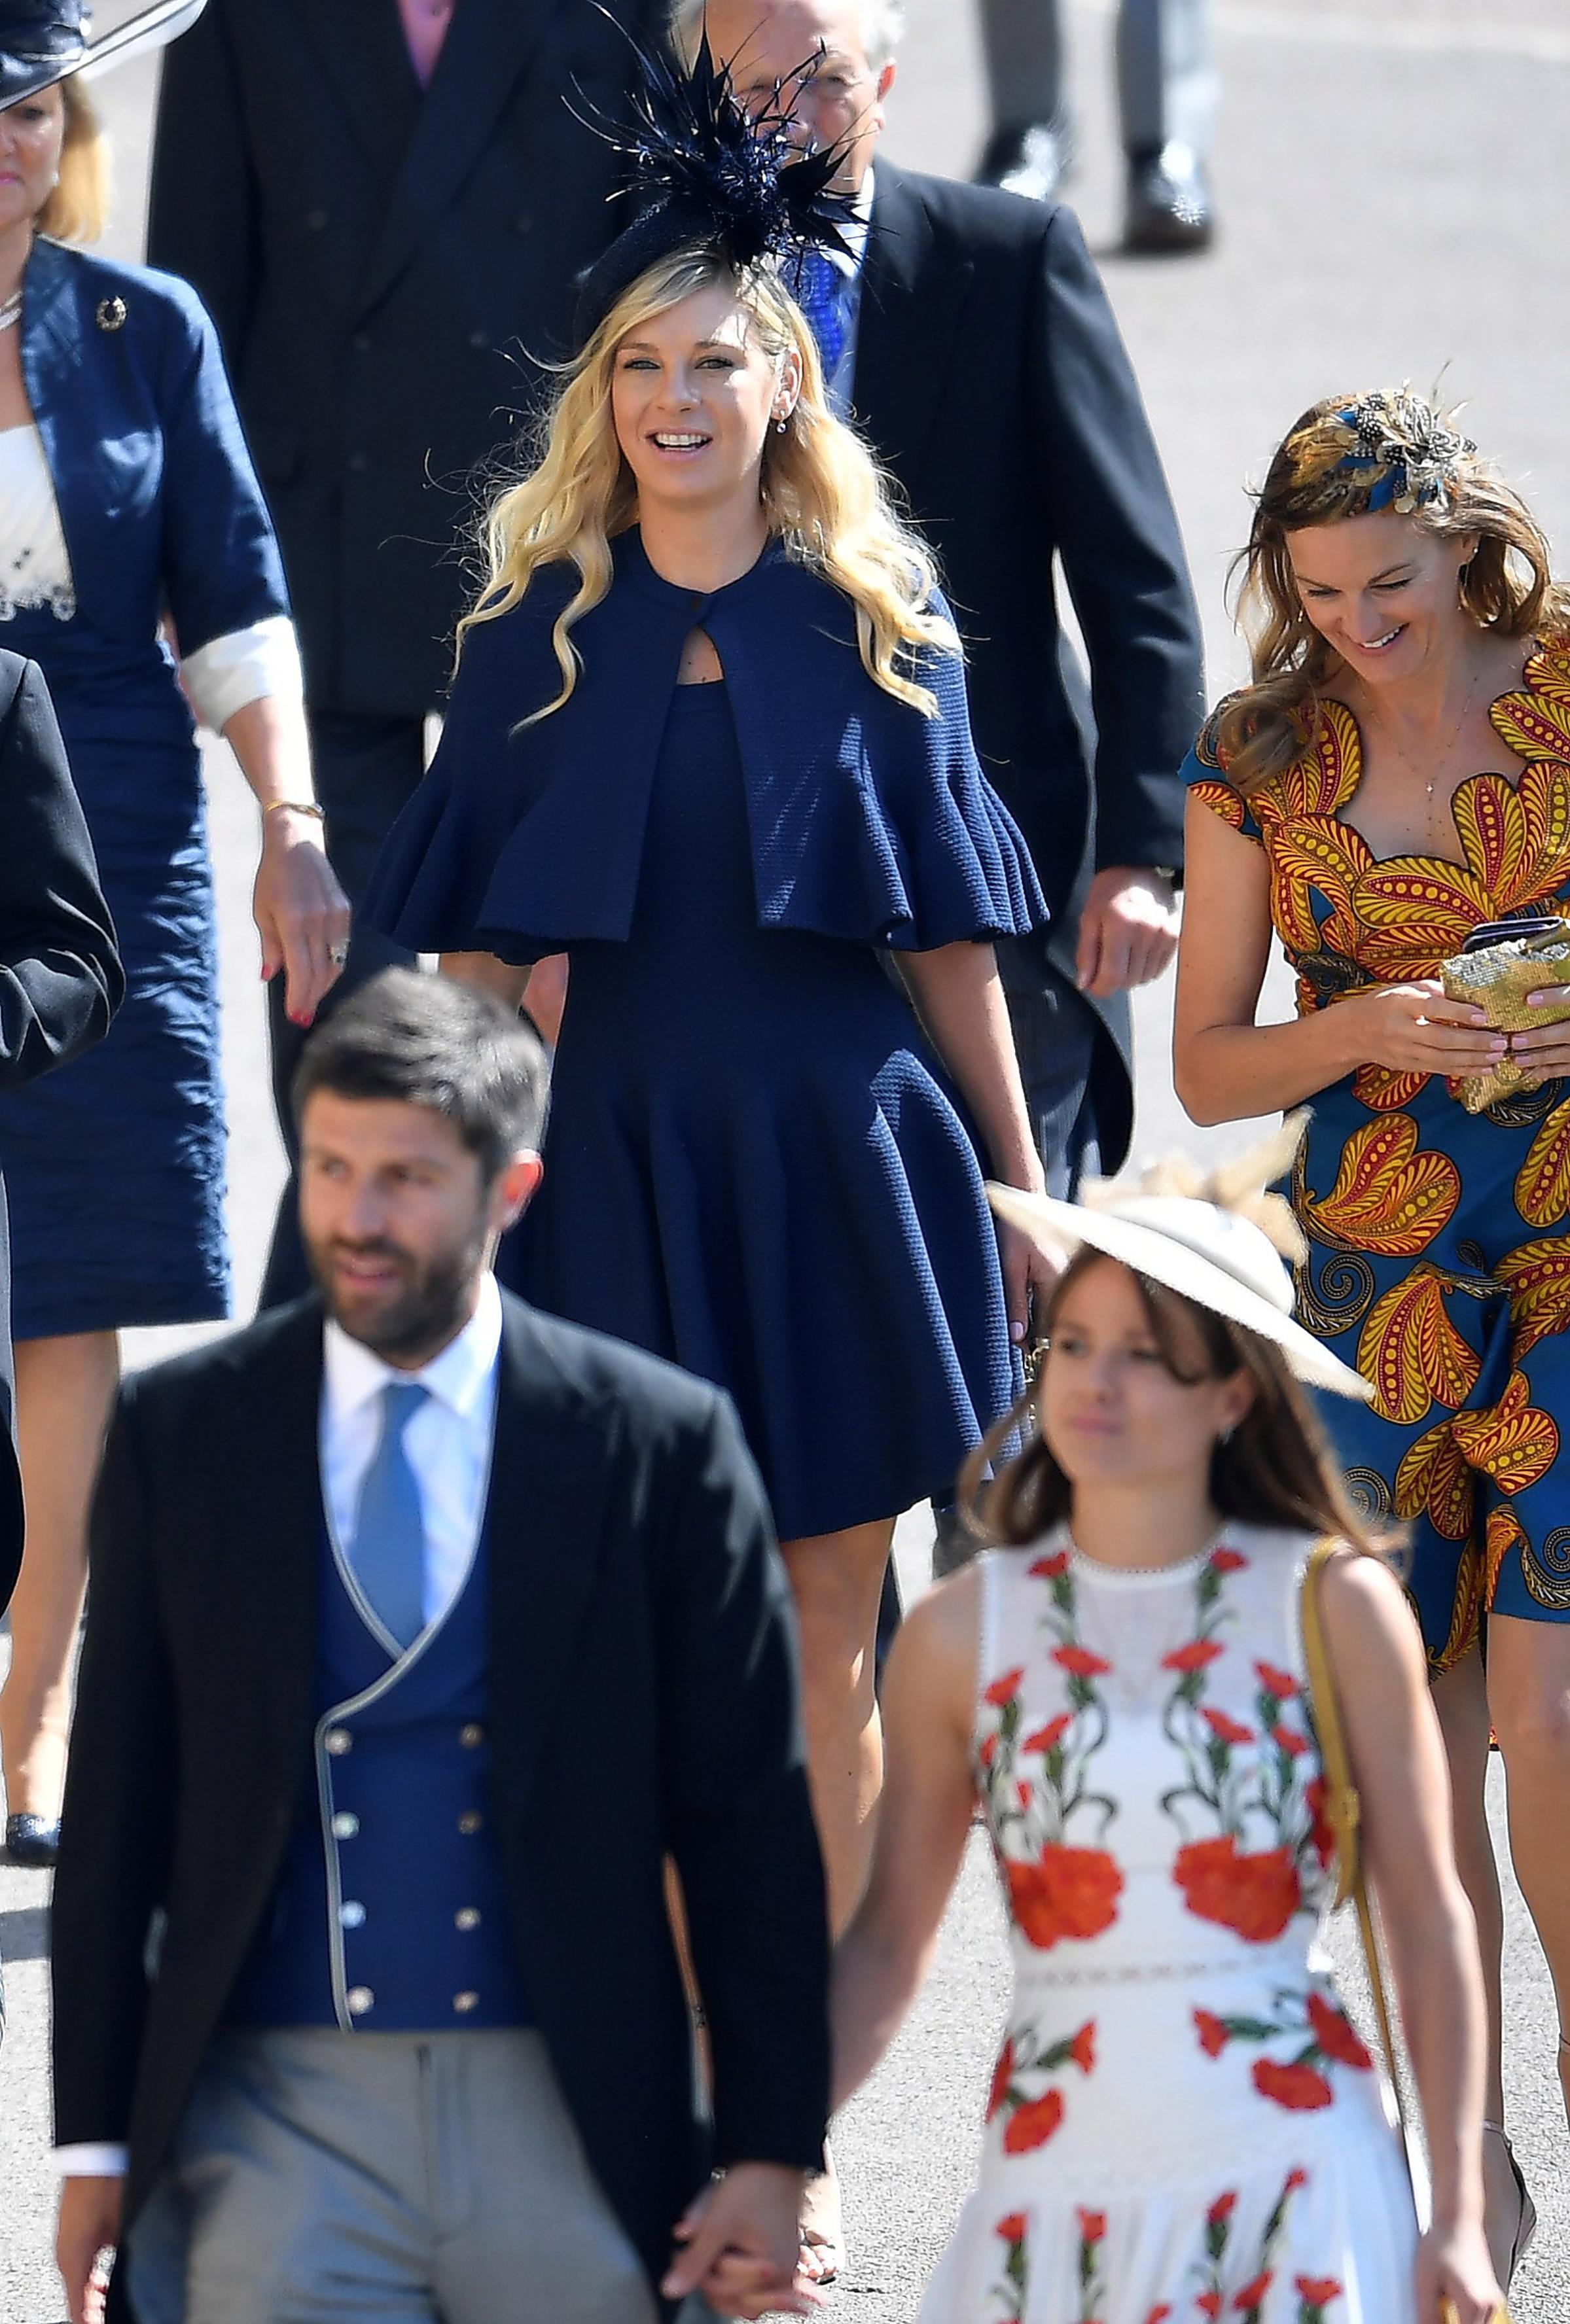 Chelsy Davy arrives with guests to the wedding of Prince Harry and Meghan Markle in Windsor, Britain, May 19, 2018.